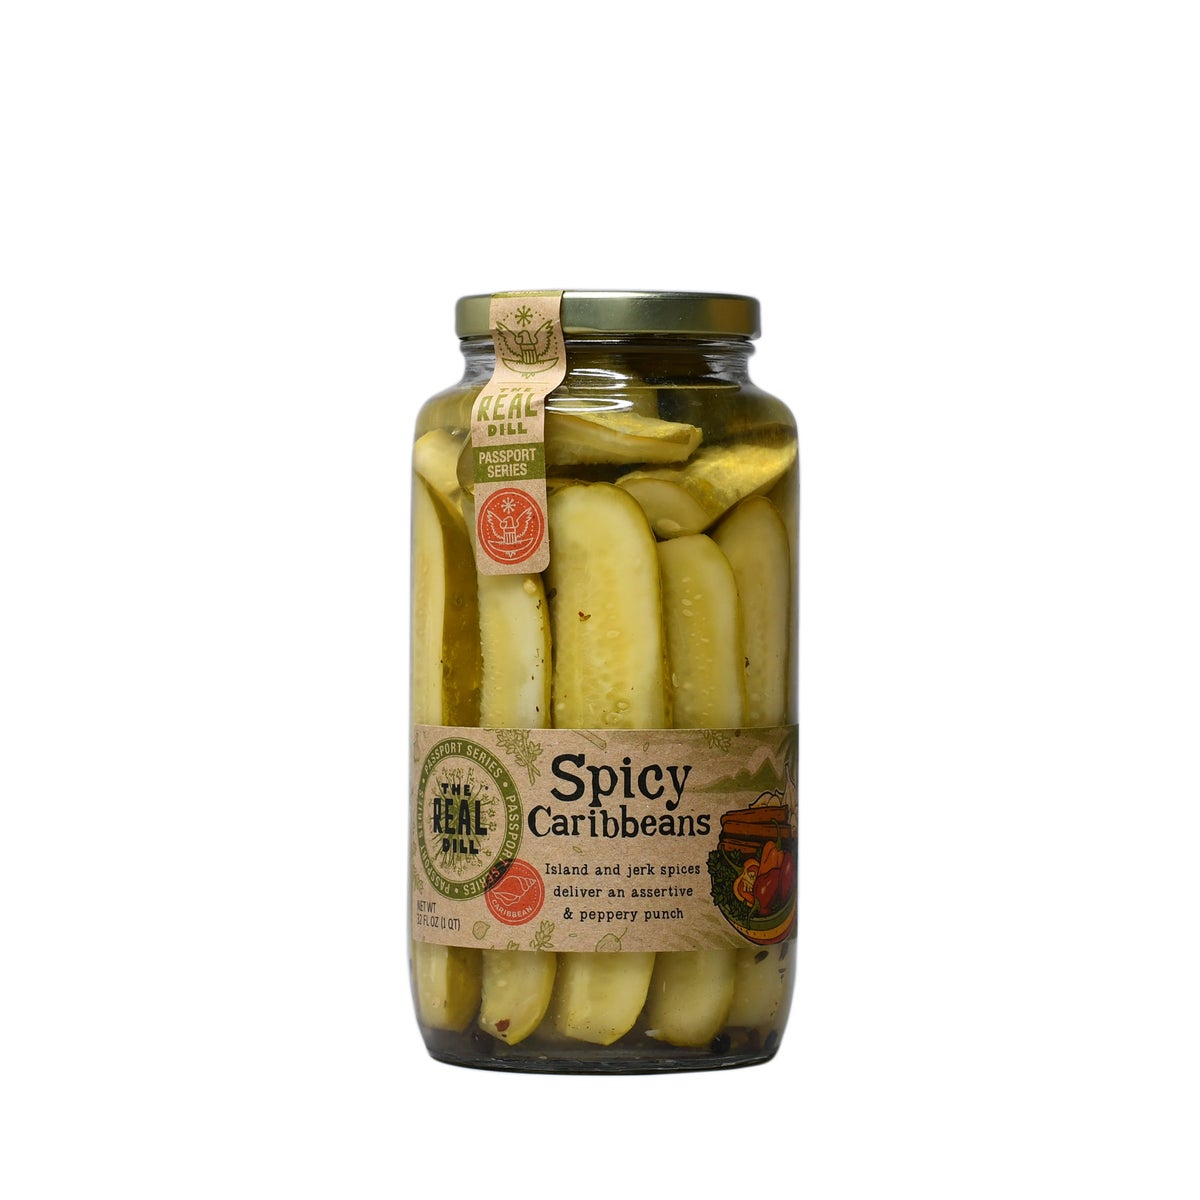 THE REAL DILL - SPICY CARIBBEANS PICKLES